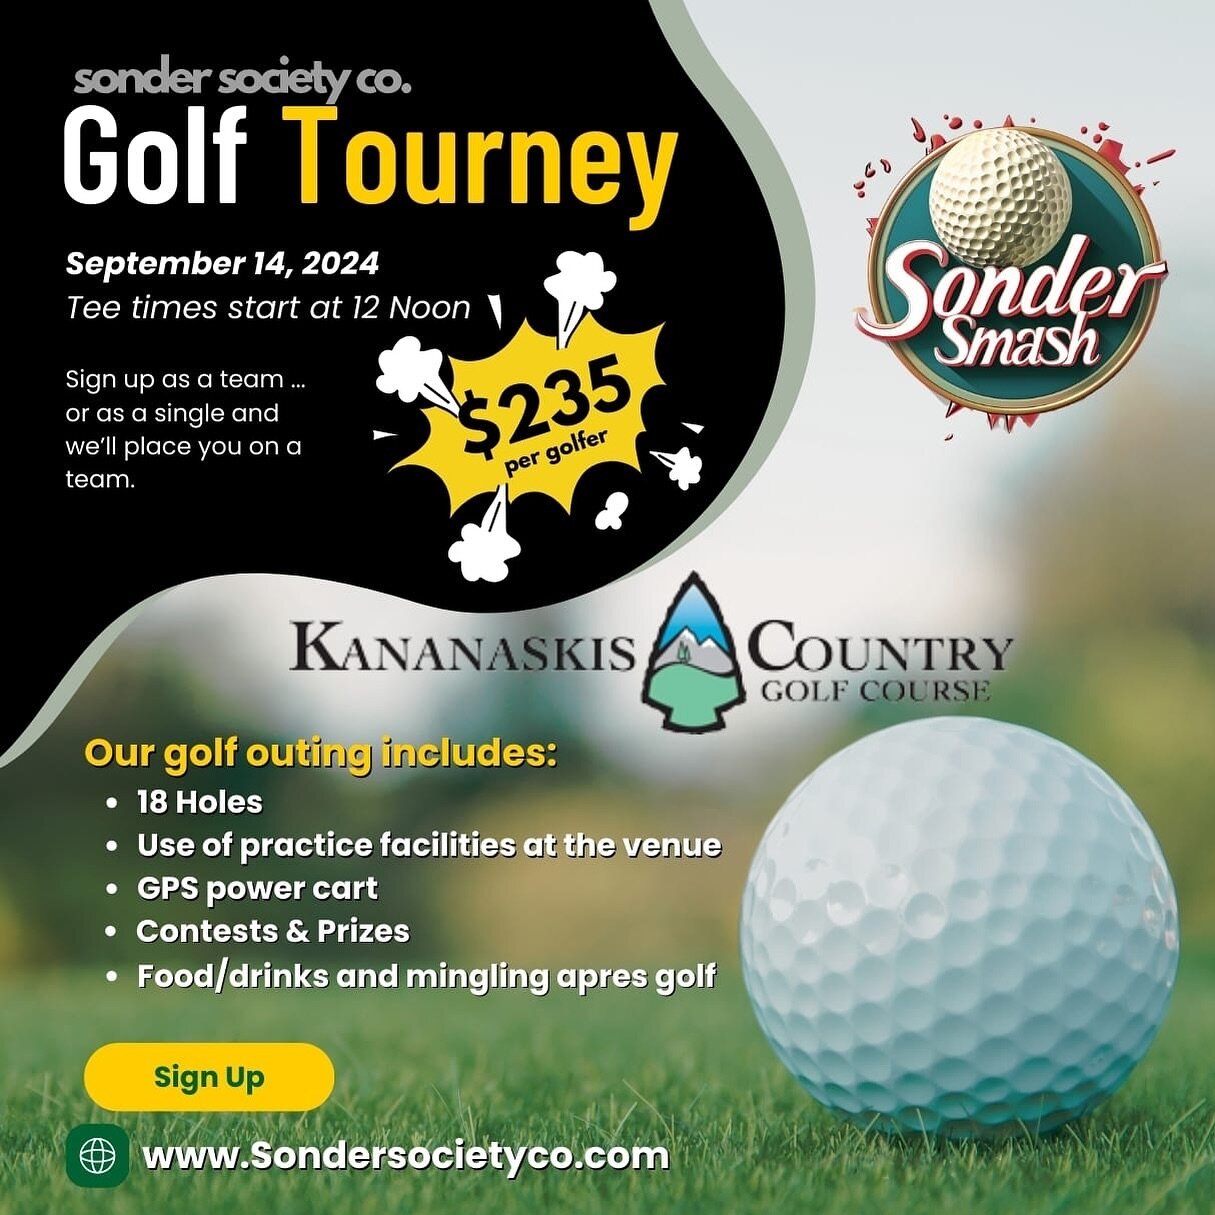 Calling all golfers! This is your chance to experience one of the most prestigious courses in Alberta!! Join us September 14th for our &ldquo;Sonder Smash&rdquo; golf tourney at the beautiful Kananaskis Country Golf Course. For $235 you will play 18 